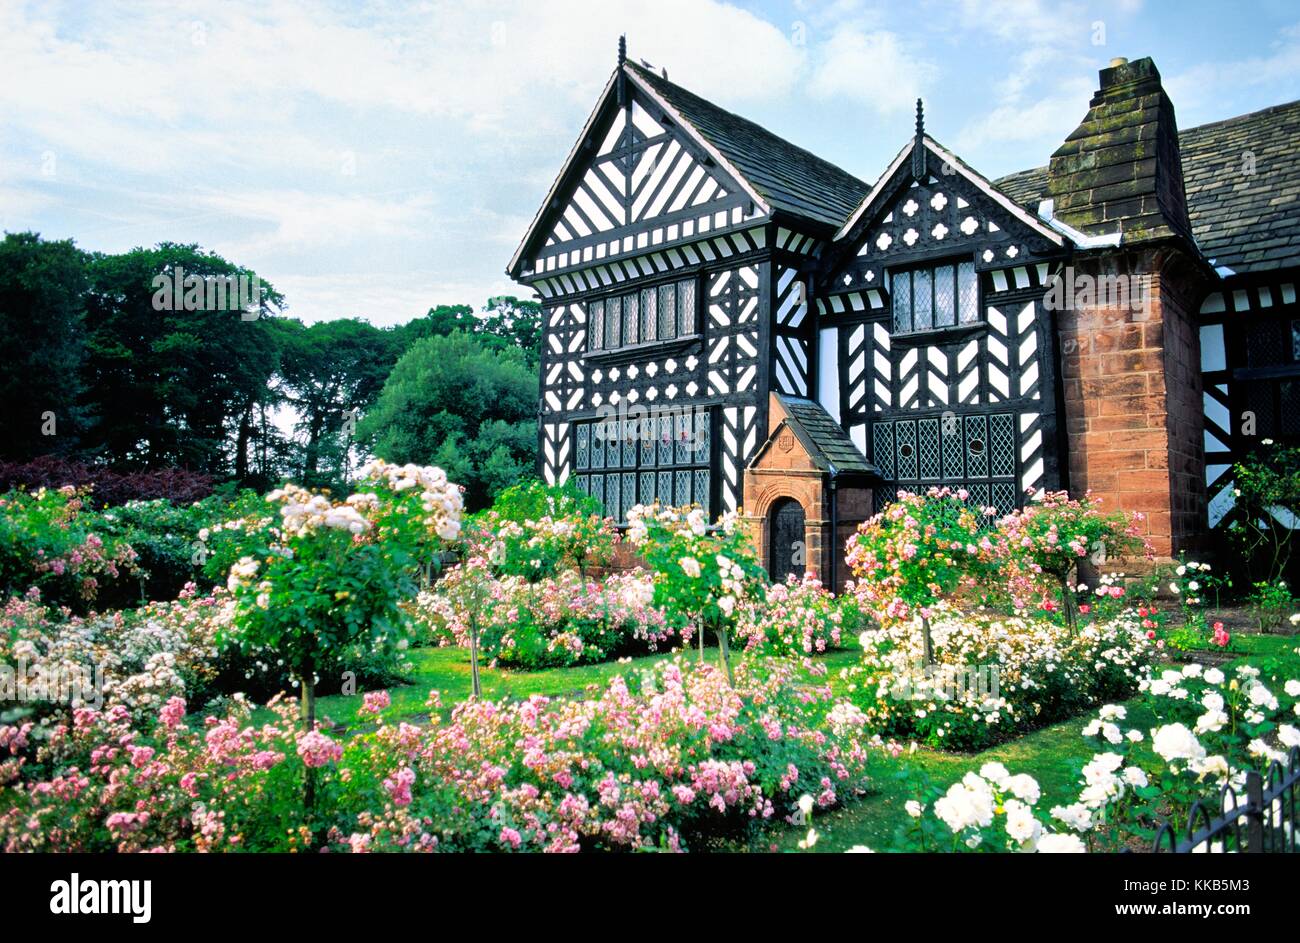 Speke Hall. Tudor period country mansion house in Speke, near Liverpool, Merseyside, England. Dates from 1530. Stock Photo